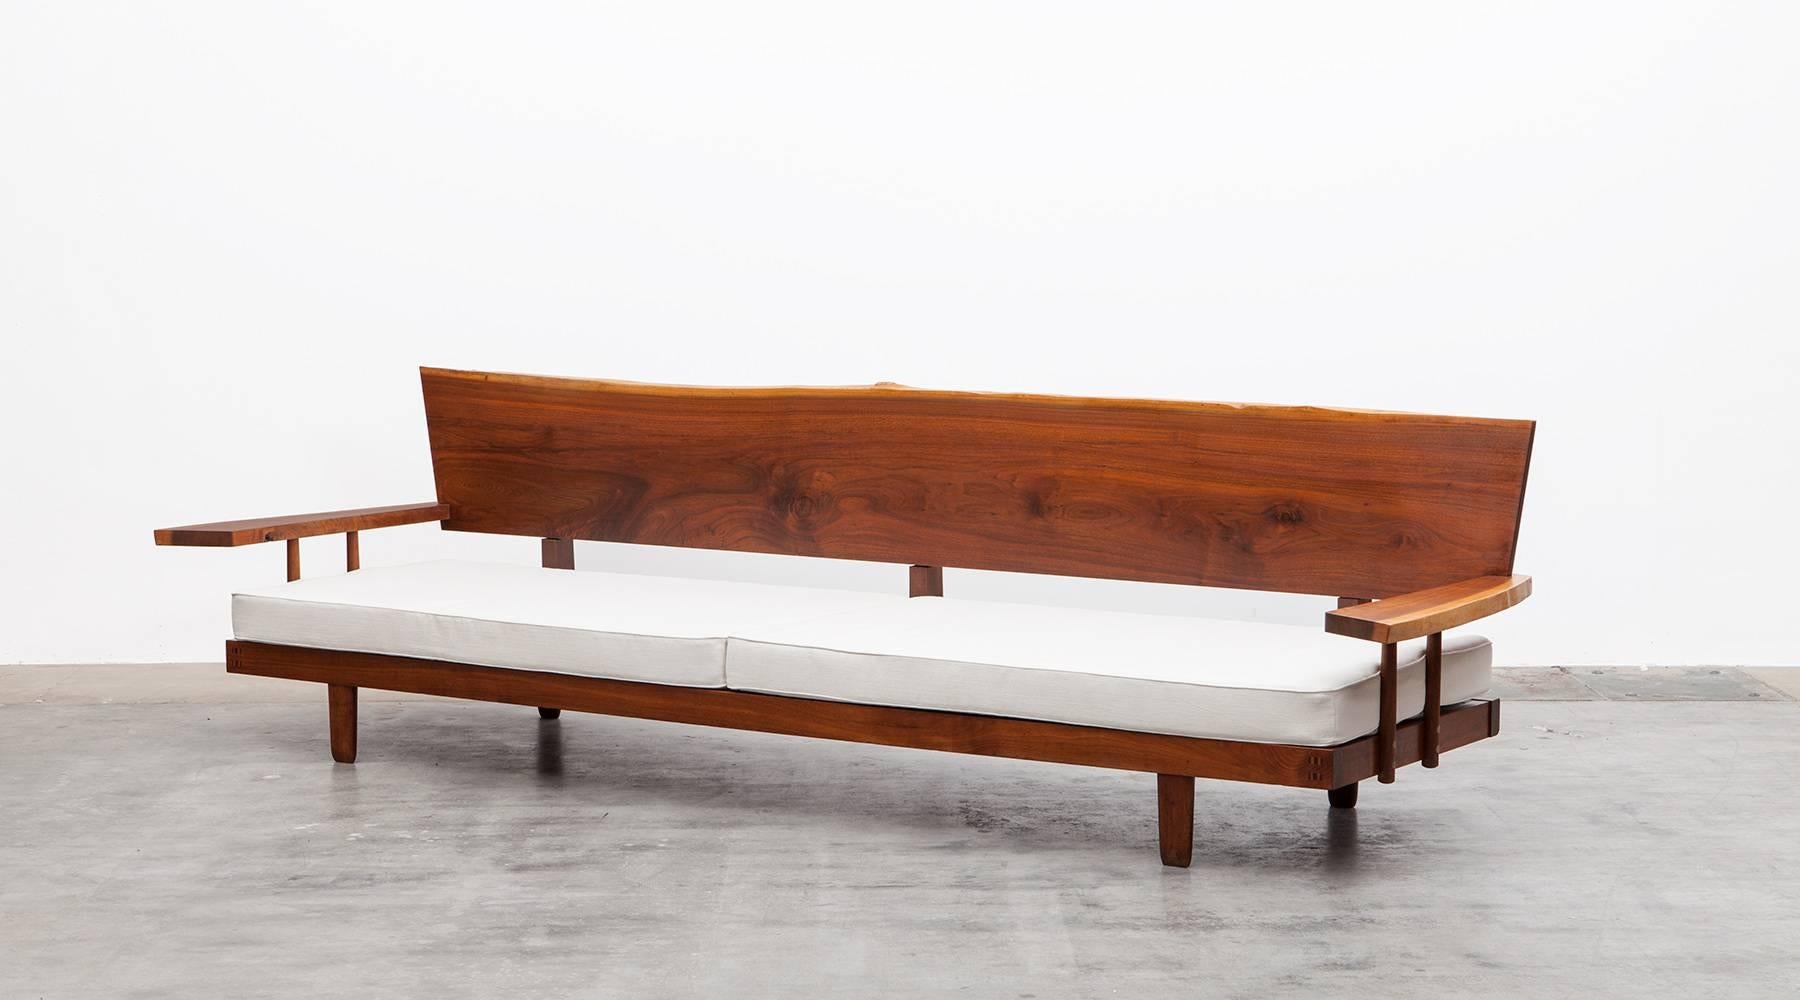 Handcrafted, stunning, marvellous sofa. It is constructed with American walnut with handwork by George Nakashima himself. 

By that, its being a great example of Nakashima's outstanding, delicately proportionated woodwork. The Architecture alumni